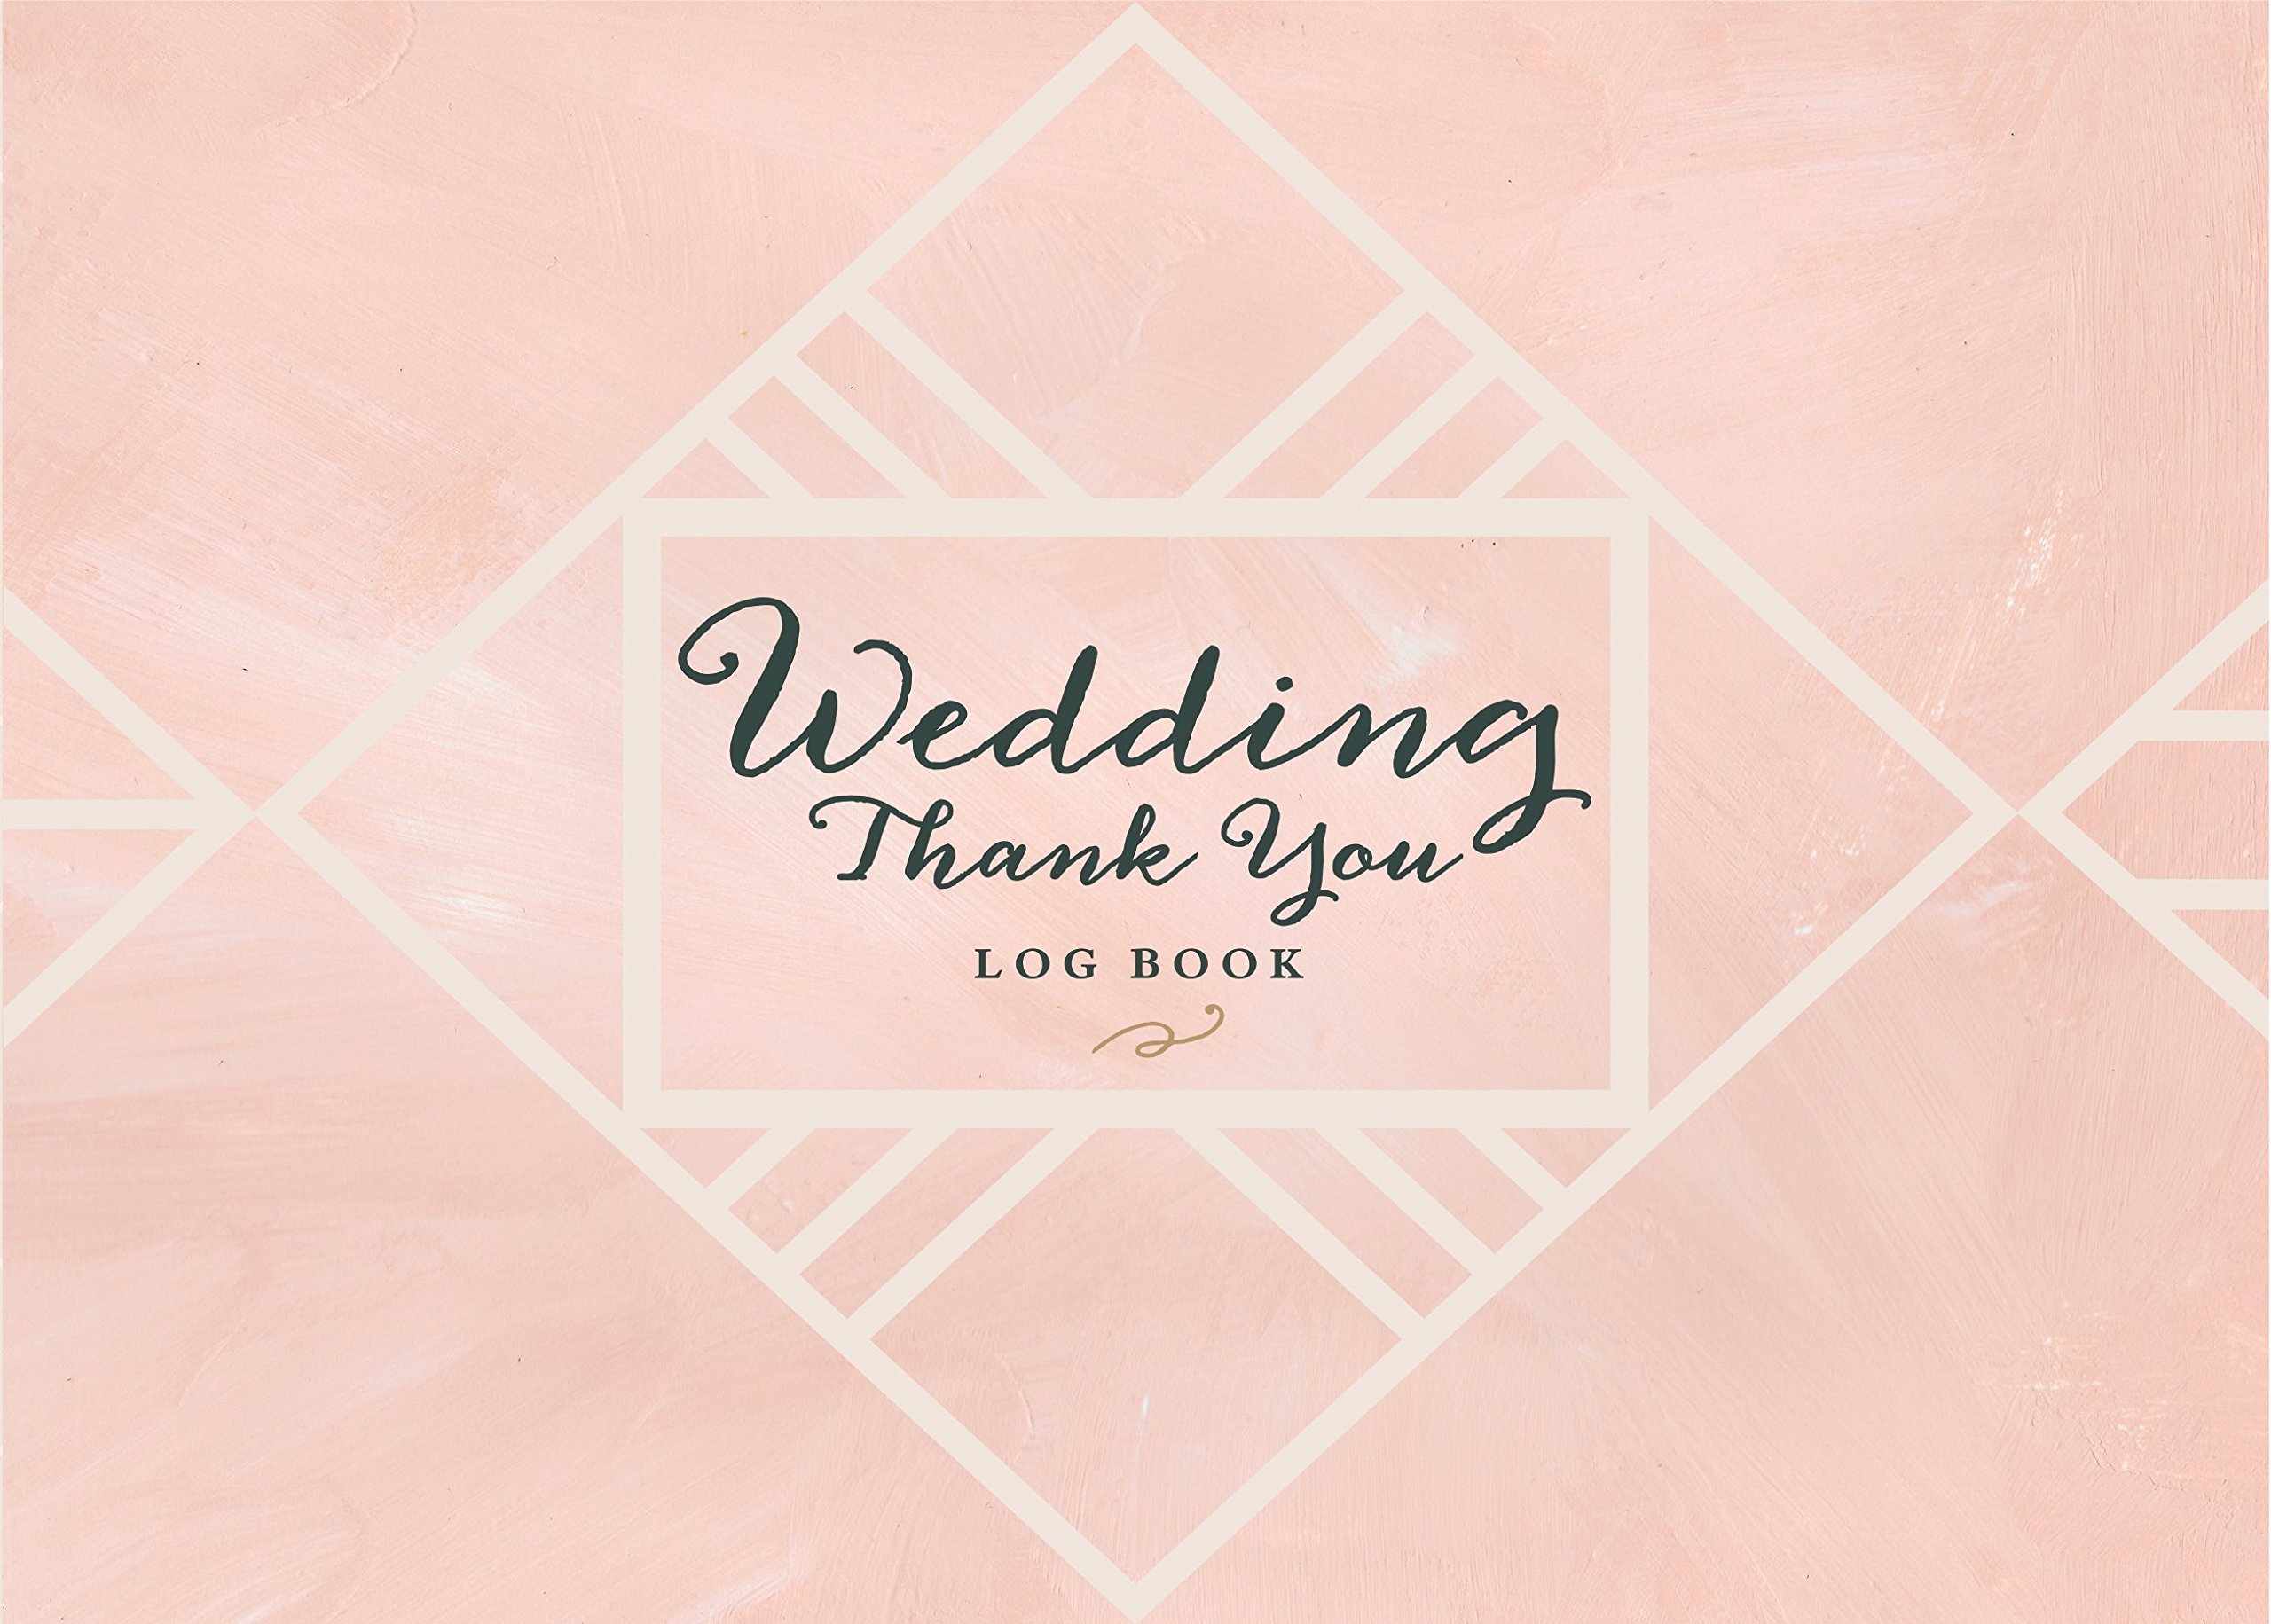 Jurnal - Wedding Thank You Logbook: Keep Track of All the Thoughtful Gifts and Gestures | Littlehampton Book